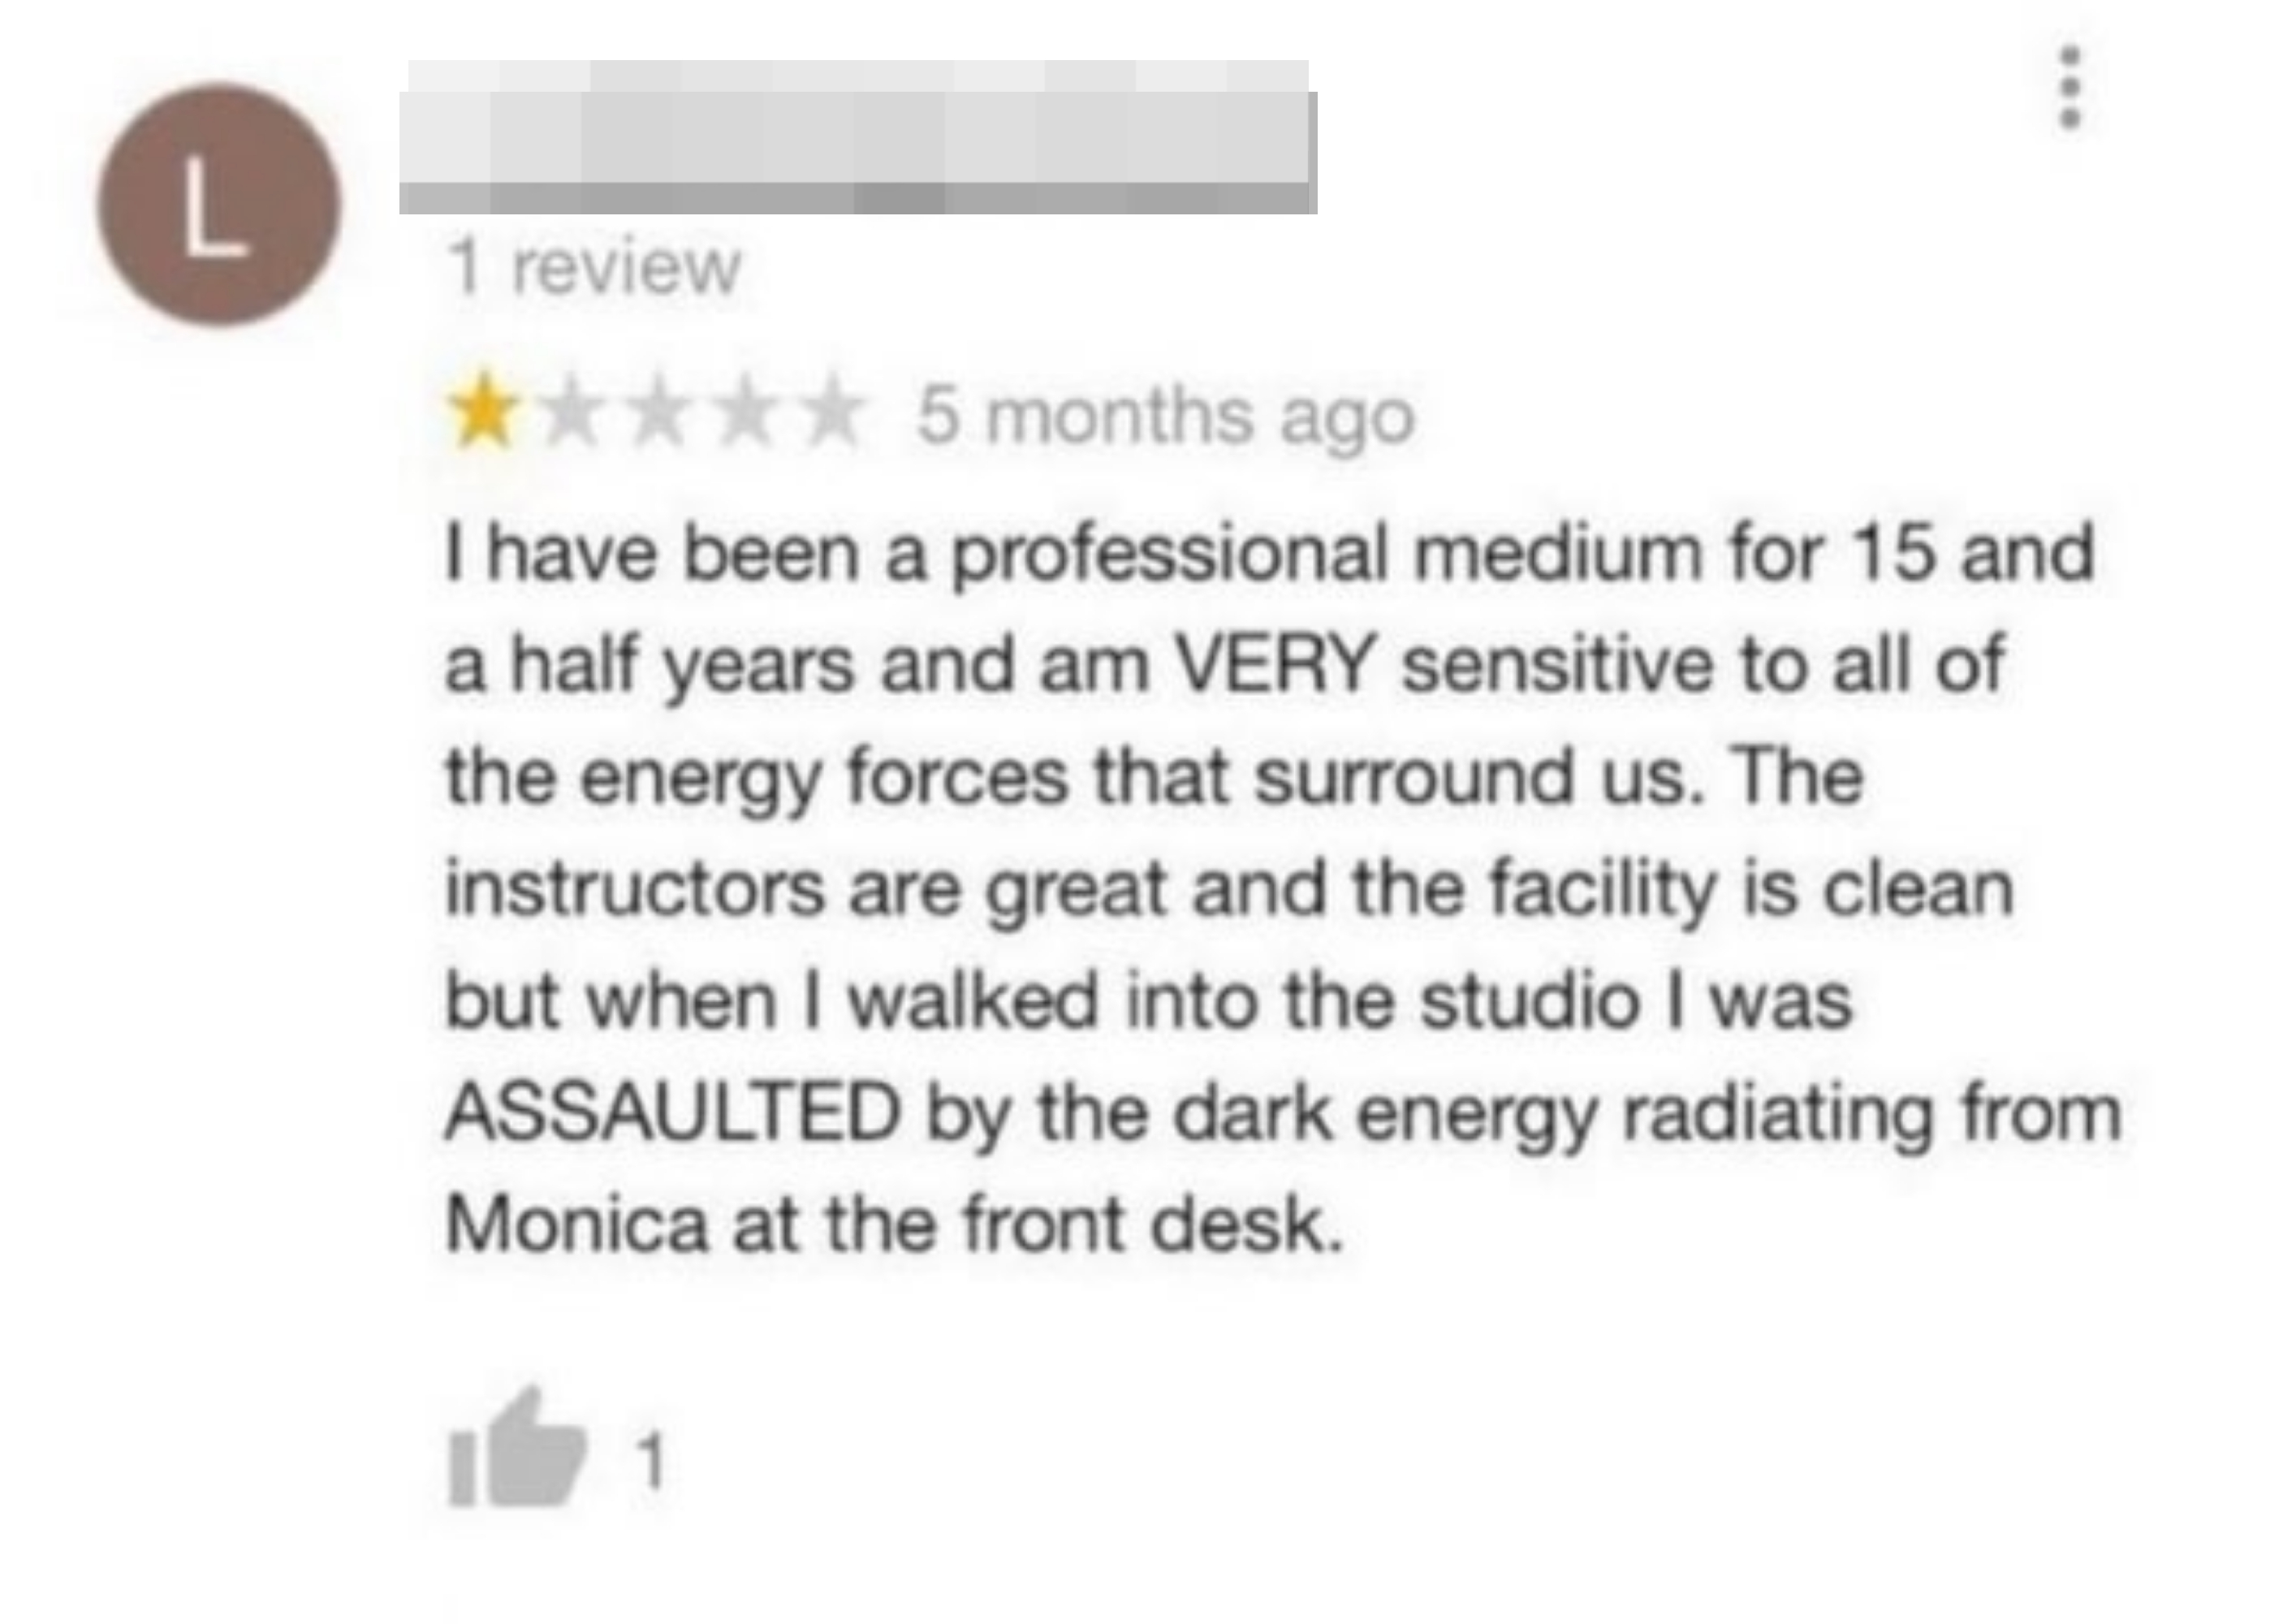 one star review: i have been a professional medium for 15 years but when i walked into the studio i was assaulted by the dark energy radiating from monica at the front desk